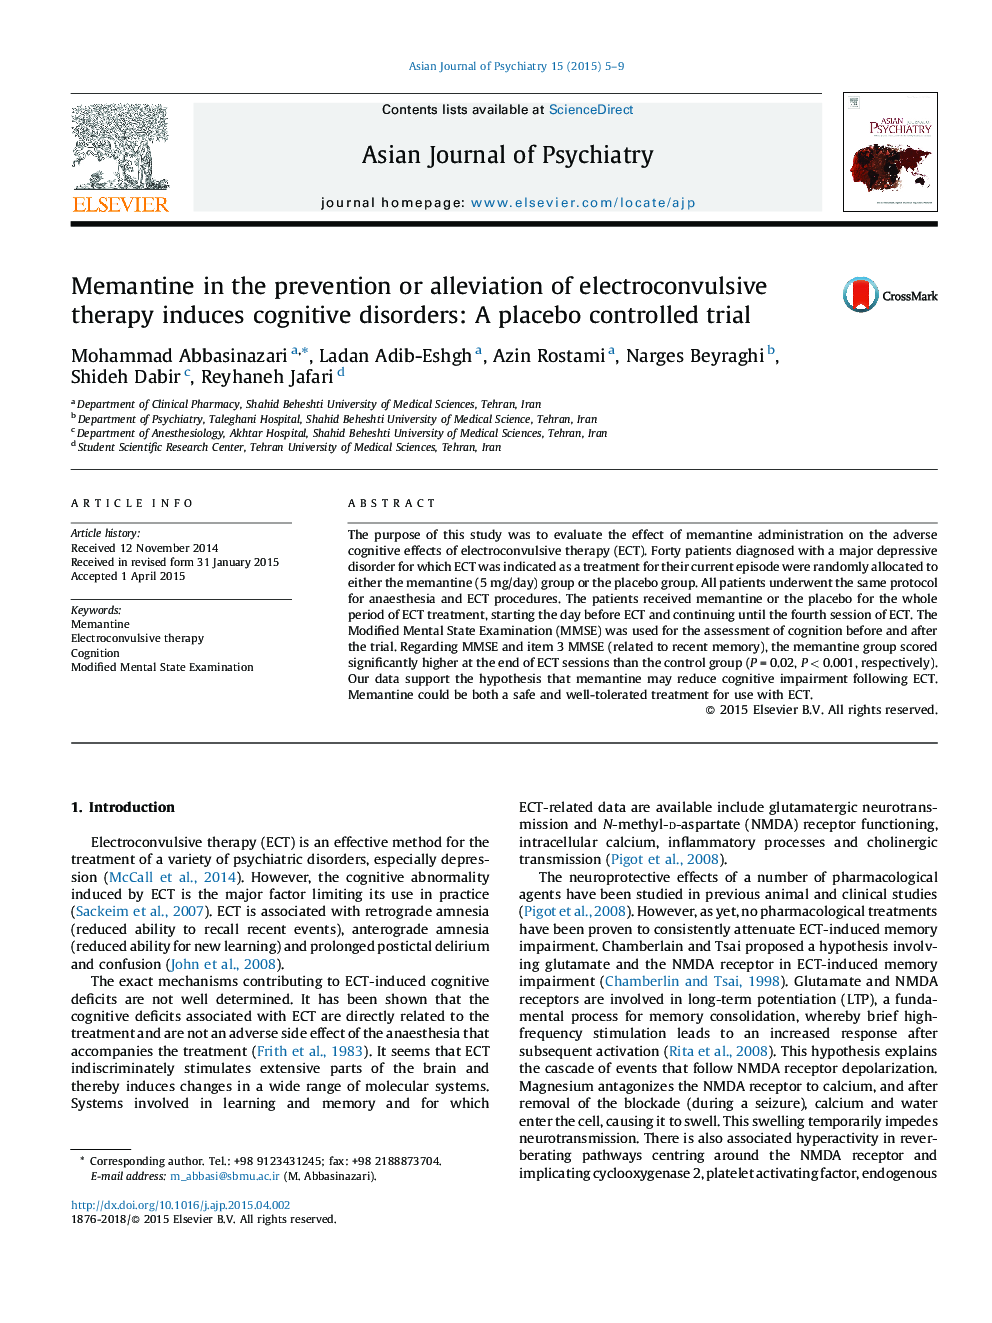 Memantine in the prevention or alleviation of electroconvulsive therapy induces cognitive disorders: A placebo controlled trial